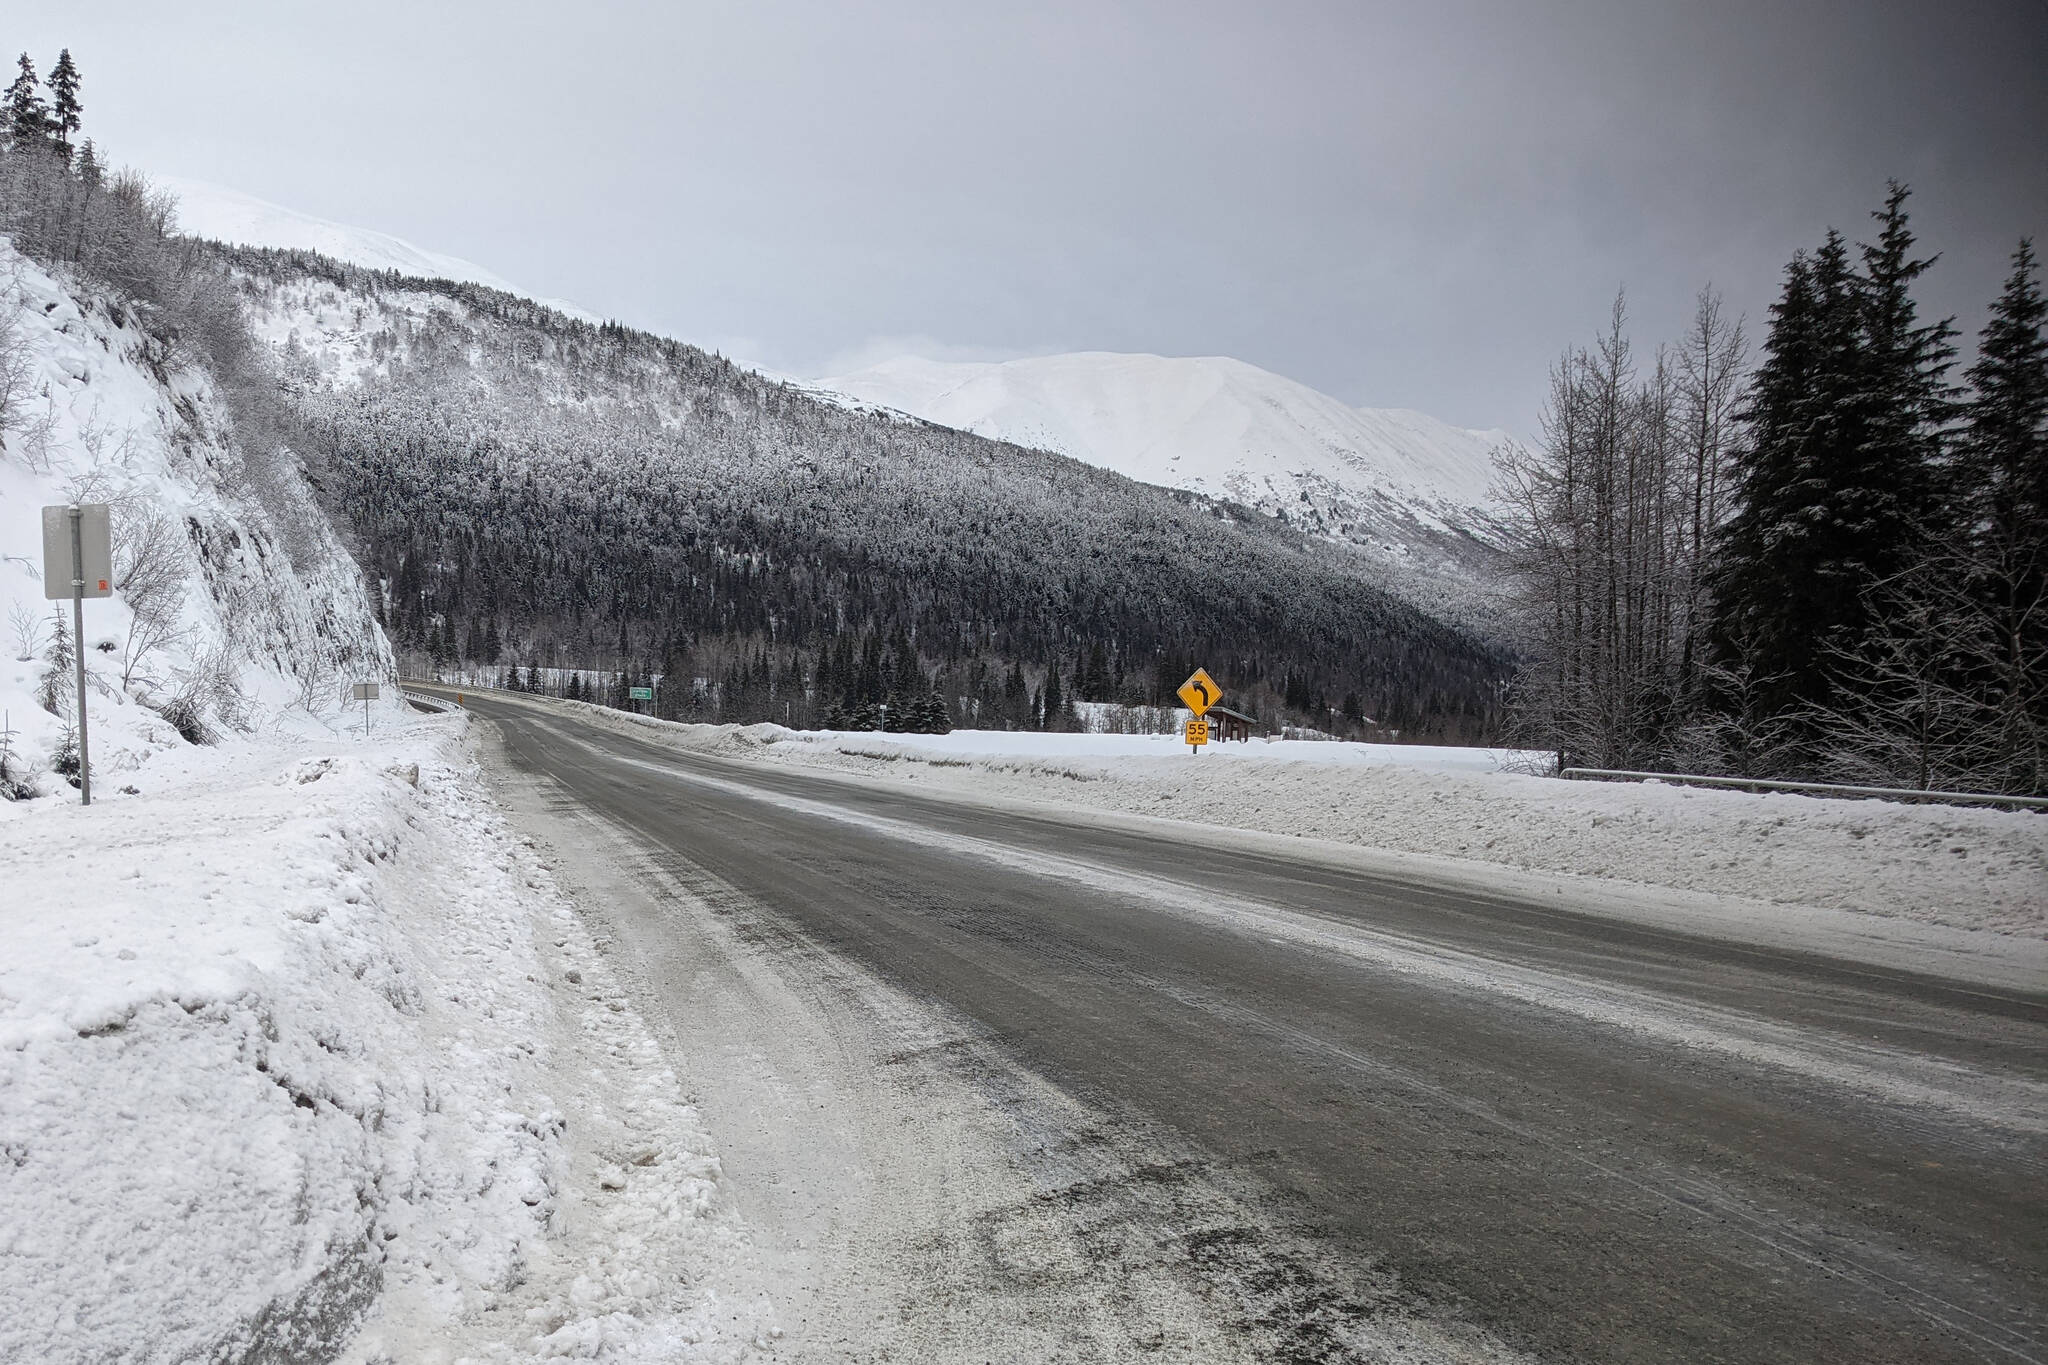 Snow is piled along the Seward Highway near the Hope Highway cutoff in Alaska on Thursday, Dec. 24, 2020. (Photo by Erin Thompson/Peninsula Clarion)